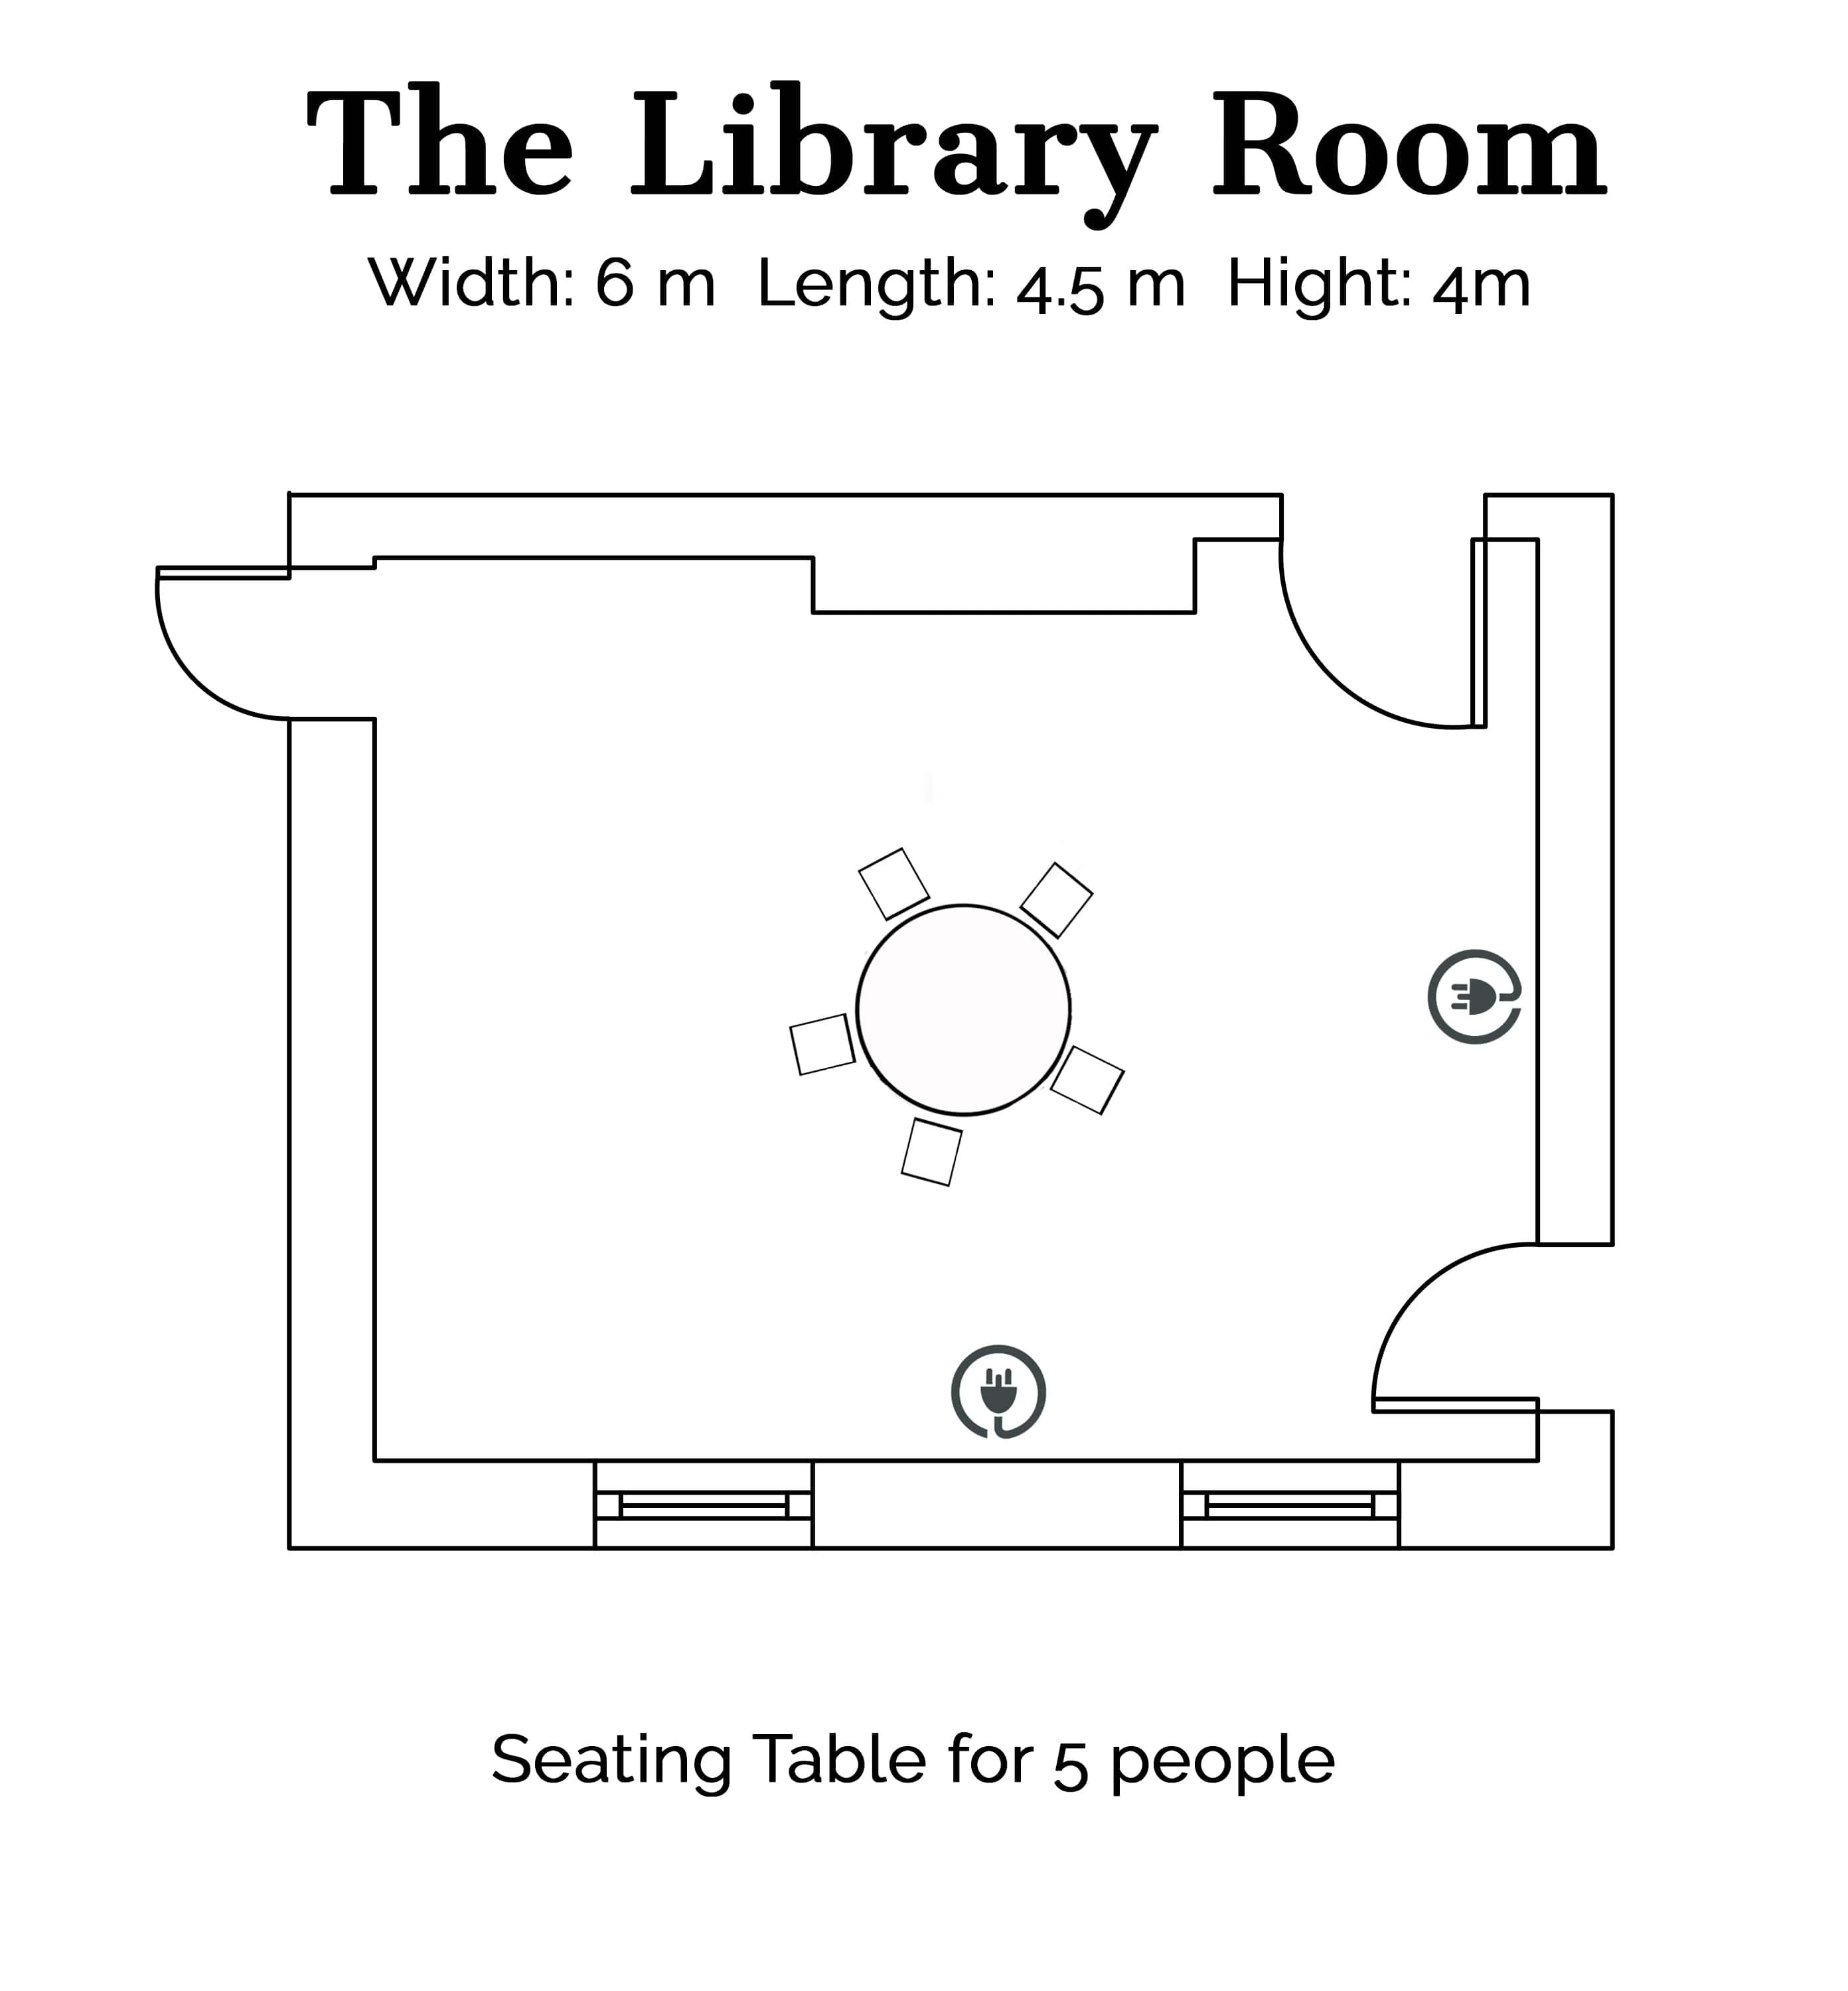 Library Seating Arrangement for 5 people